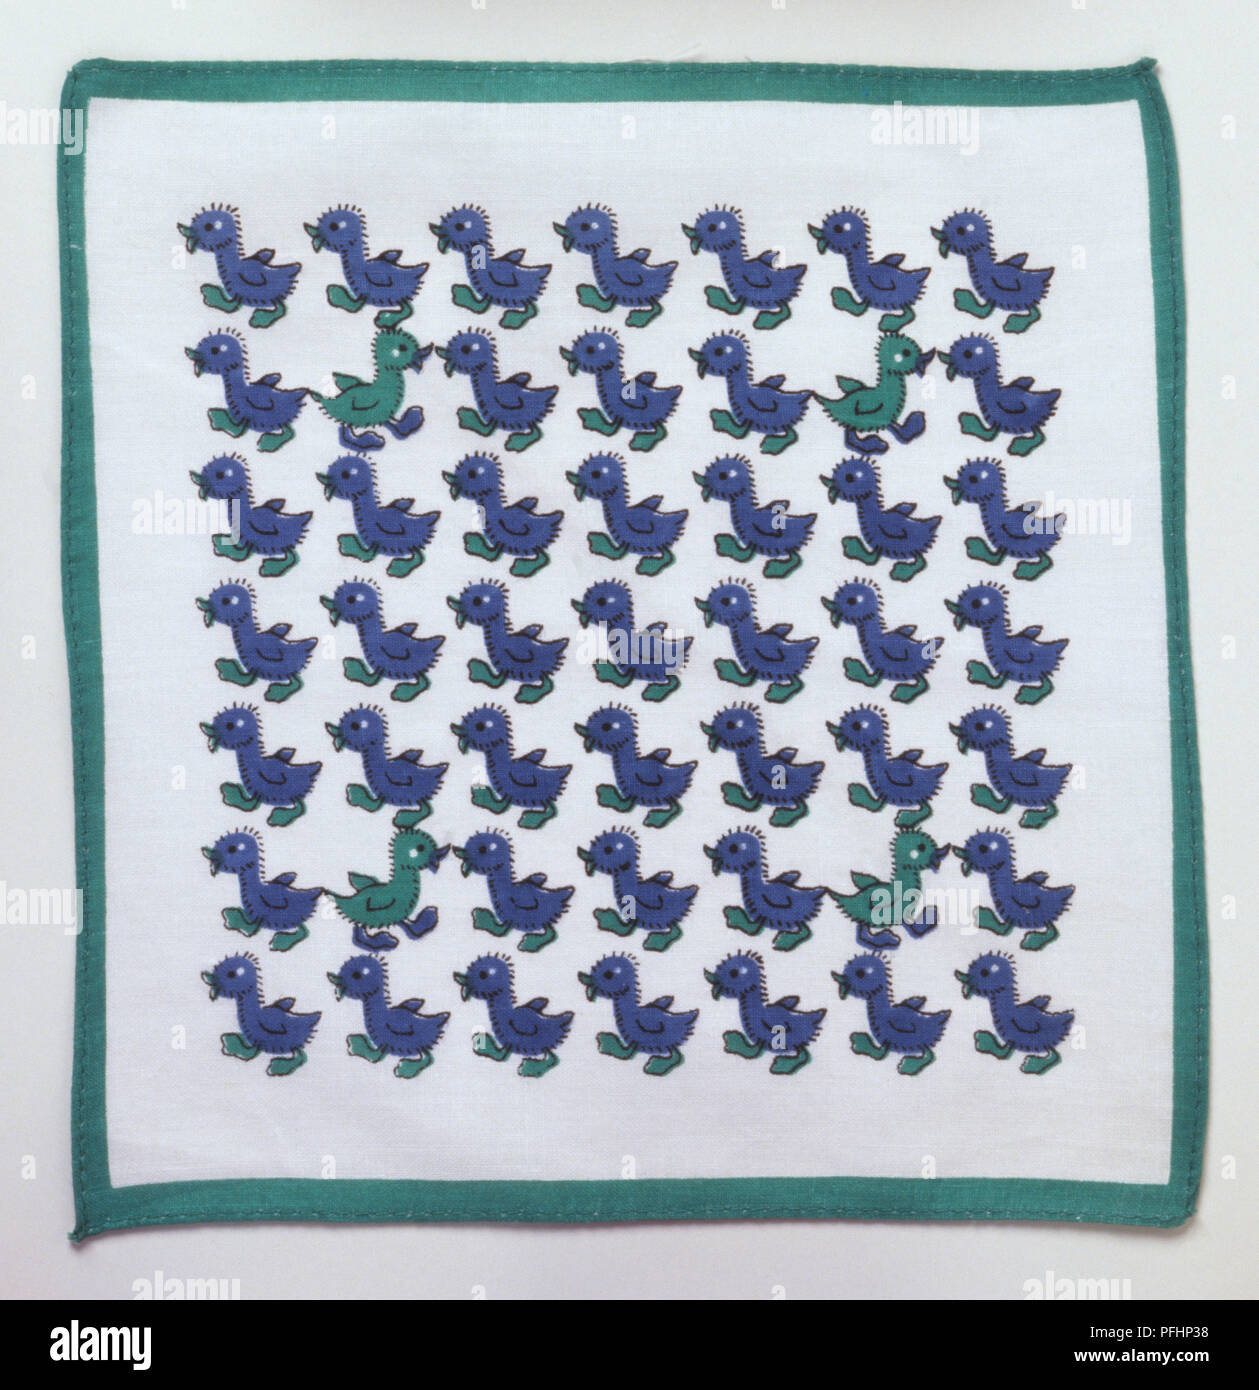 Green edged handkerchief, with rows of blue and green ducks at the centre Stock Photo